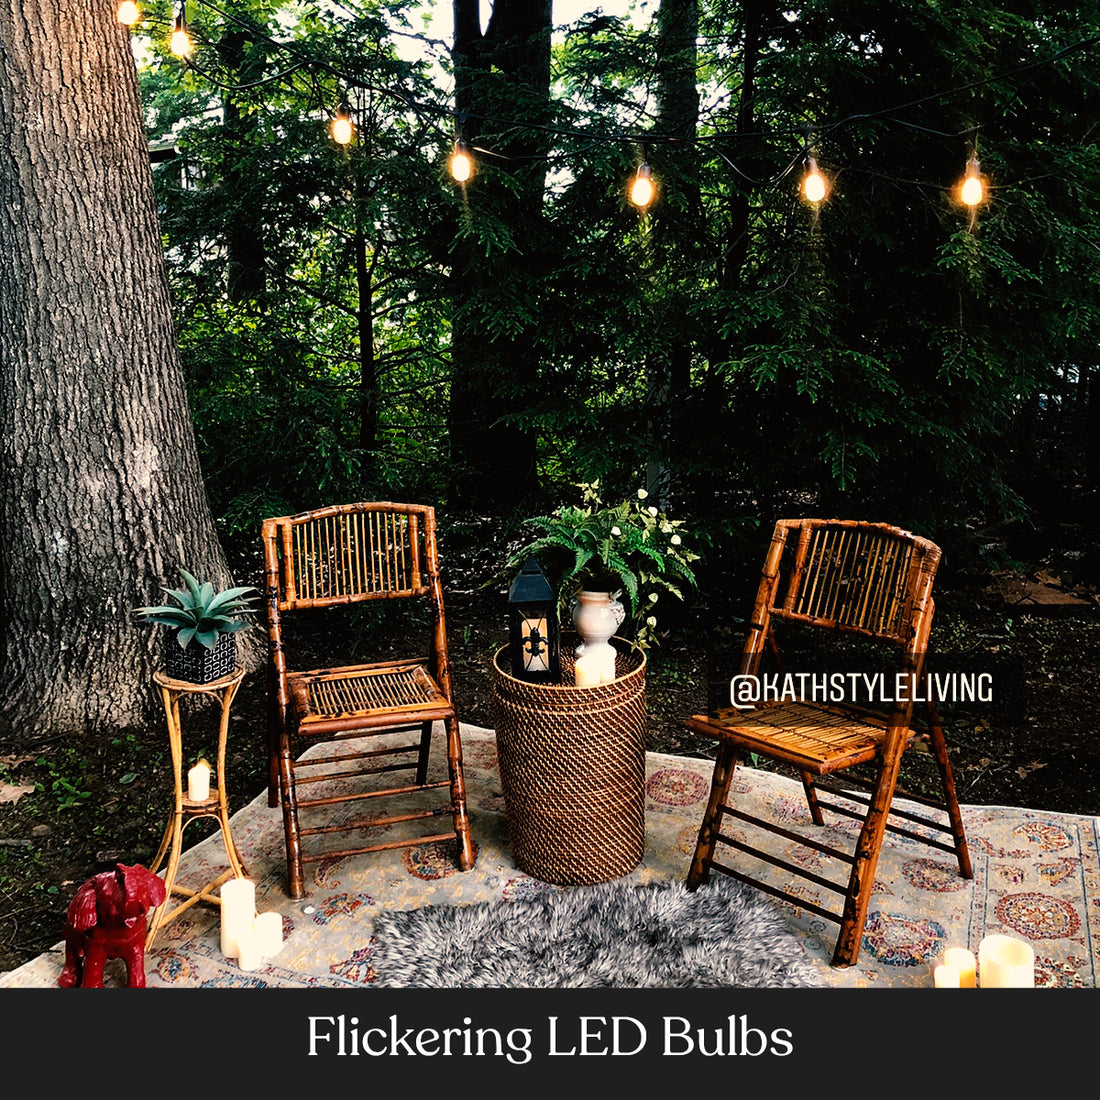 Brightech Ambience Pro with Flaming, Flickering LED Bulbs - Solar Panel Powered Hanging String Lights - Commercial Grade Waterproof, Shatterproof Cafe Lights Create Ambience In Your Yard, Deck - 27 Ft